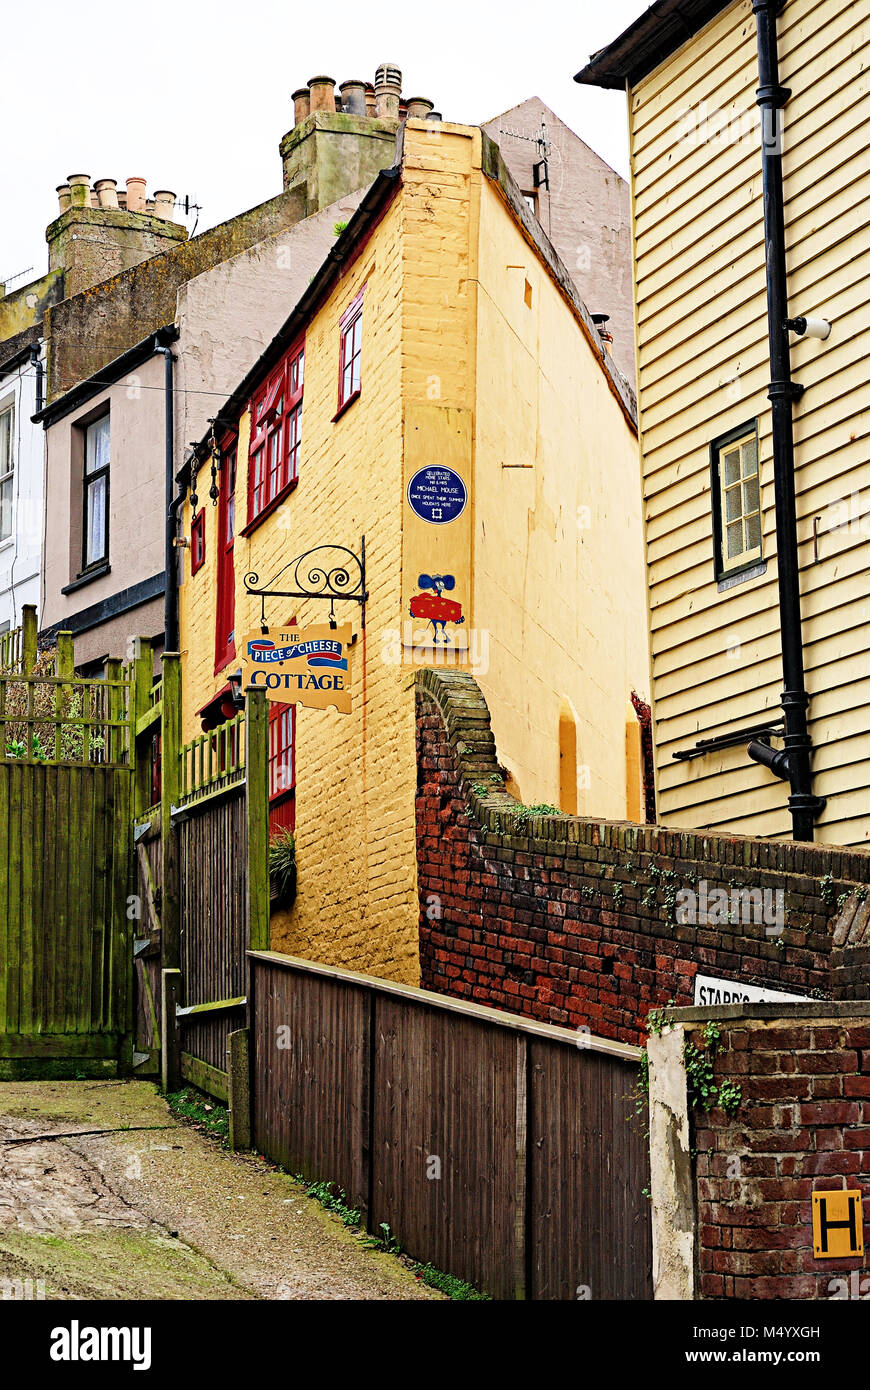 The Piece of Cheese Cottage, Hastings Stock Photo